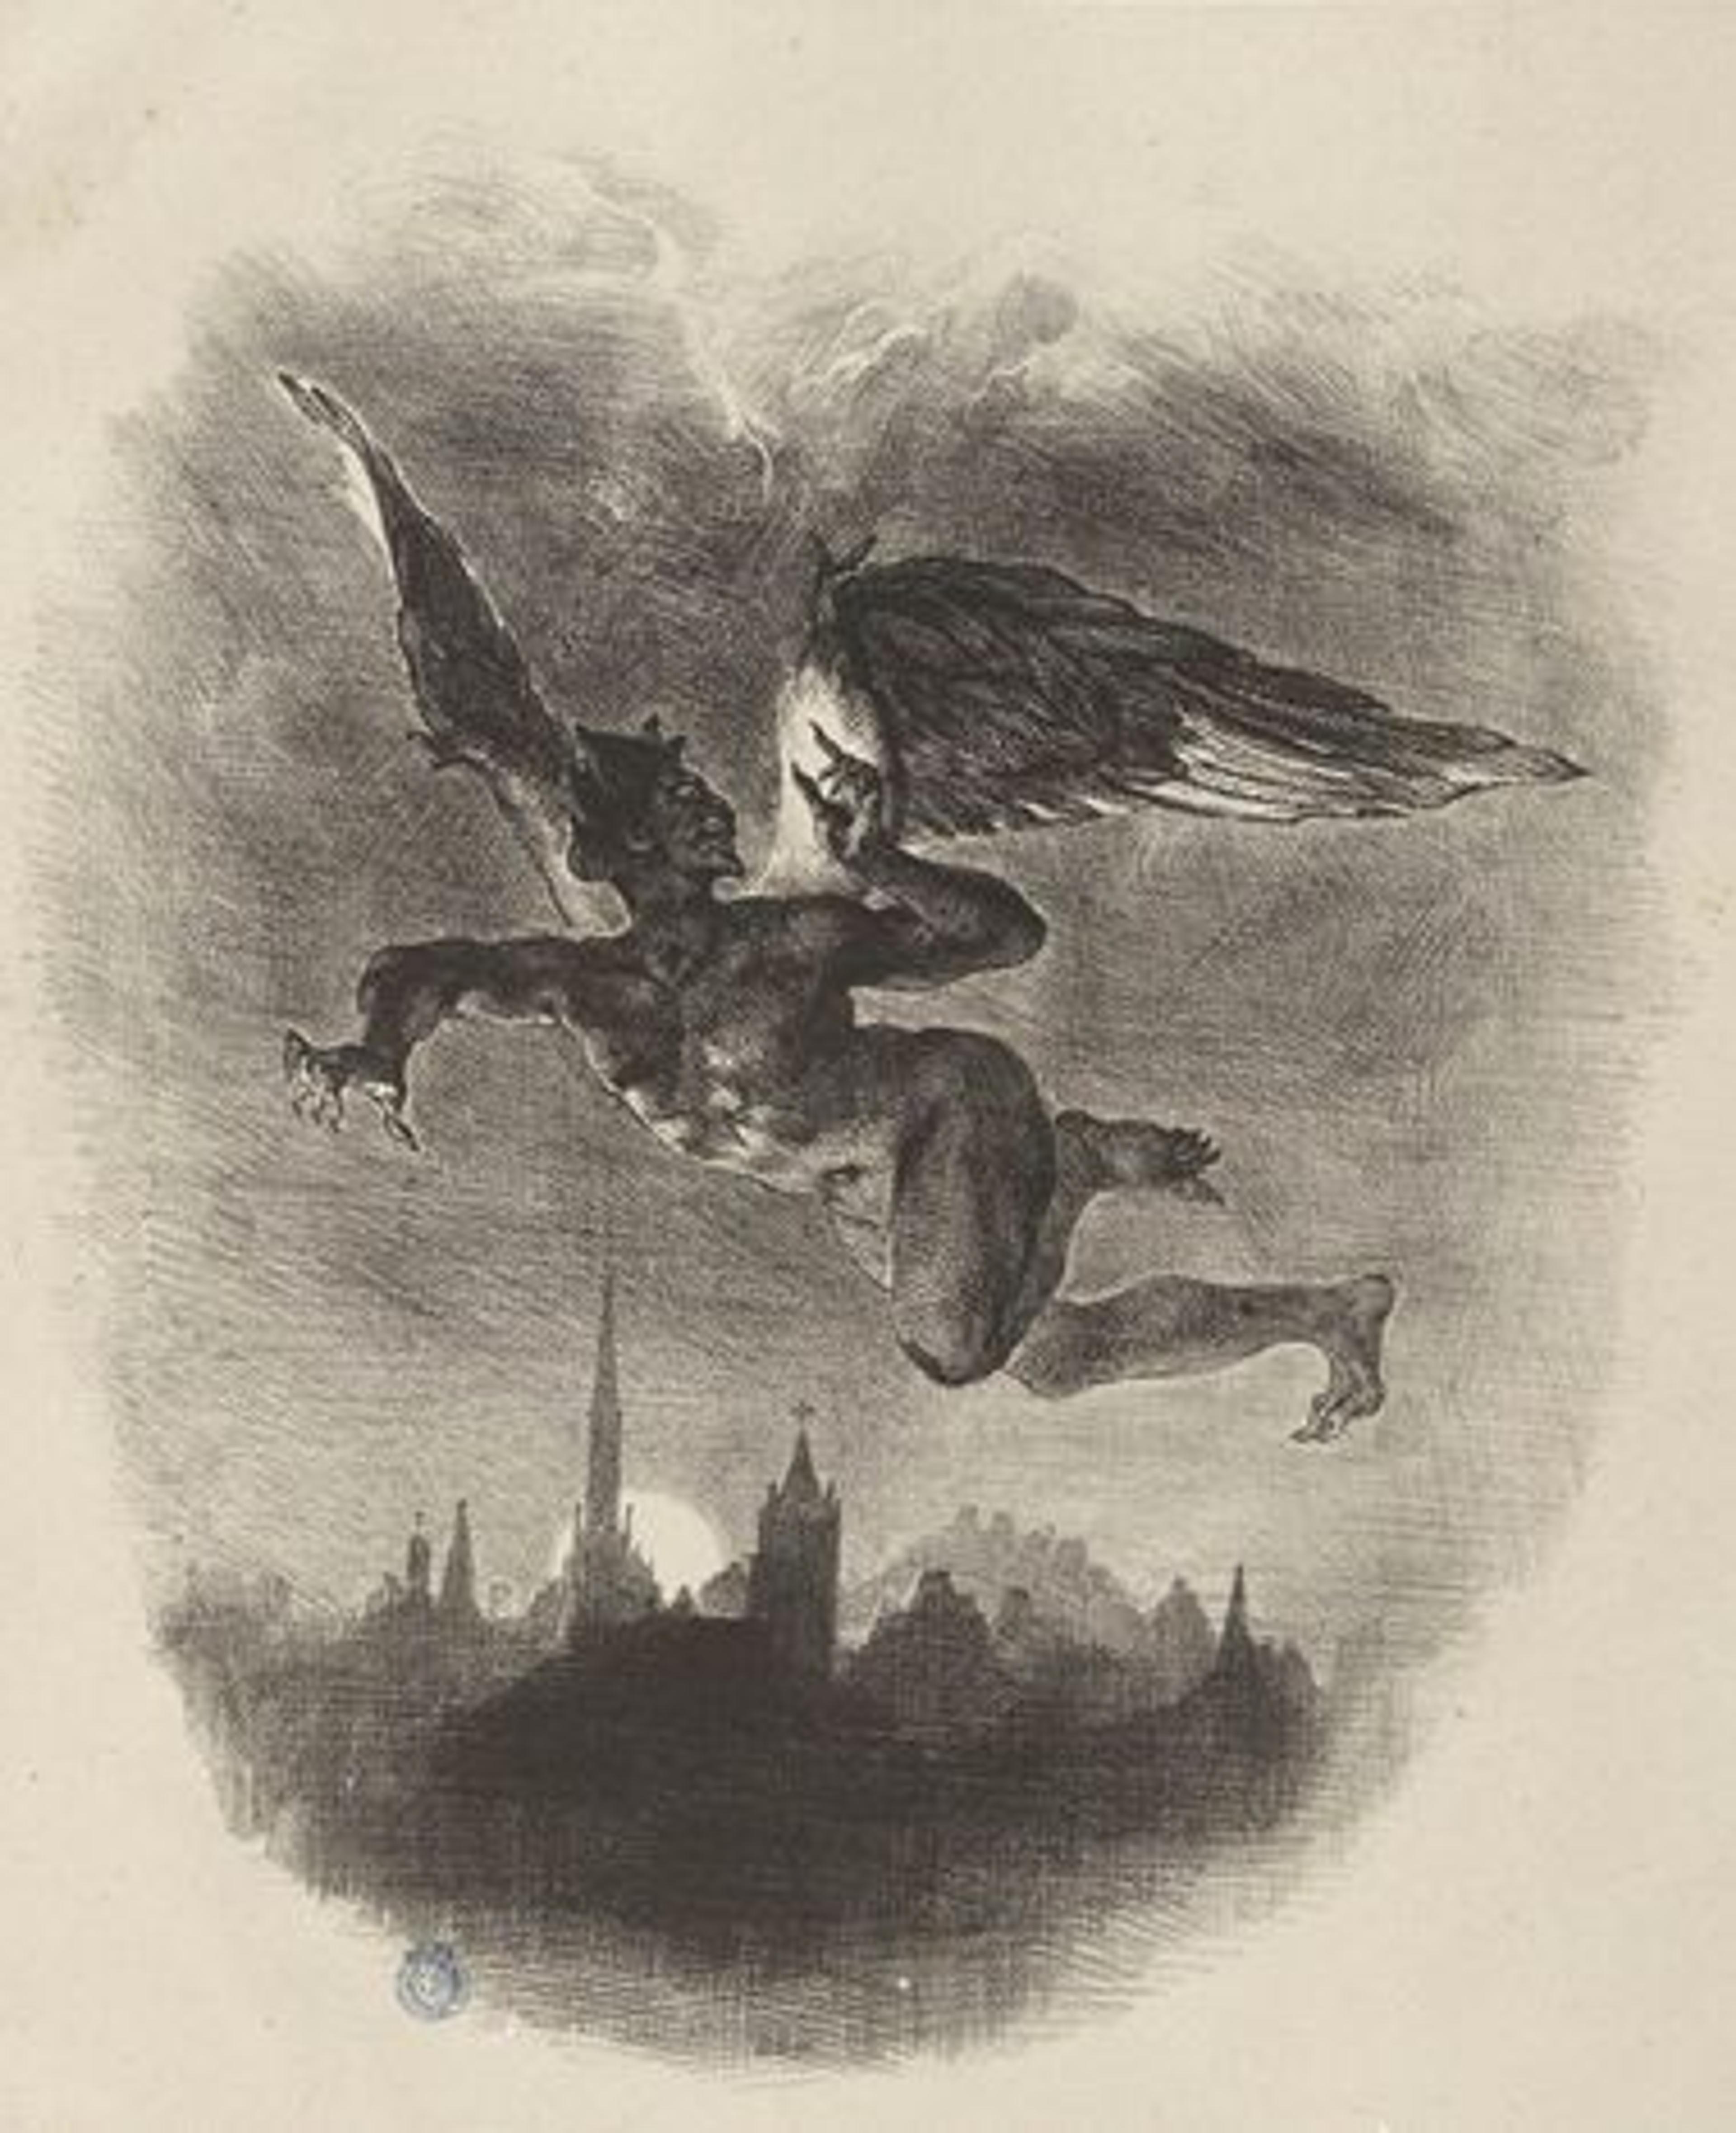 Delacroix lithograph depicting Mephistopheles in a scene from Goethe's "Faust" 